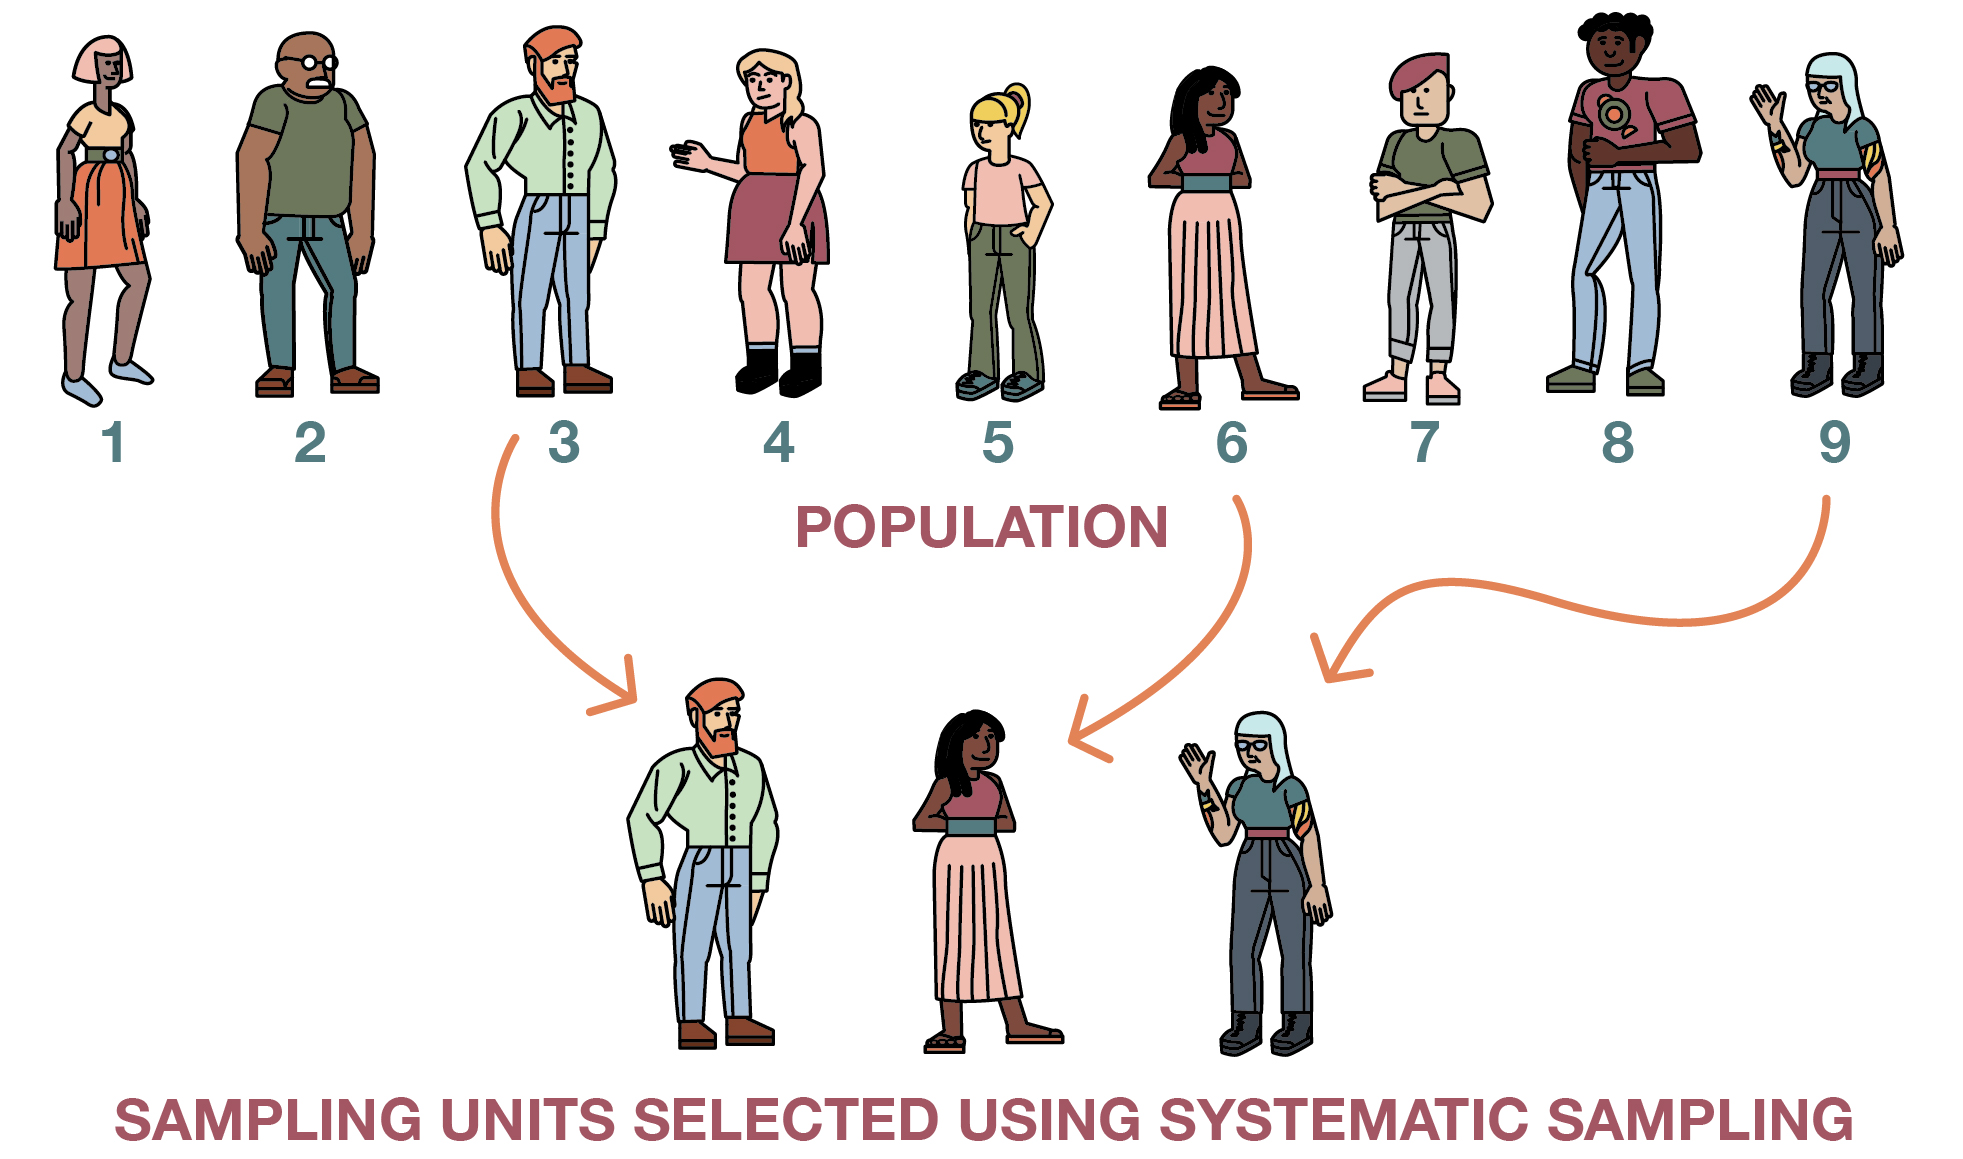 Nine individuals in a population of interest, out of which every third person has been selected for the sample.